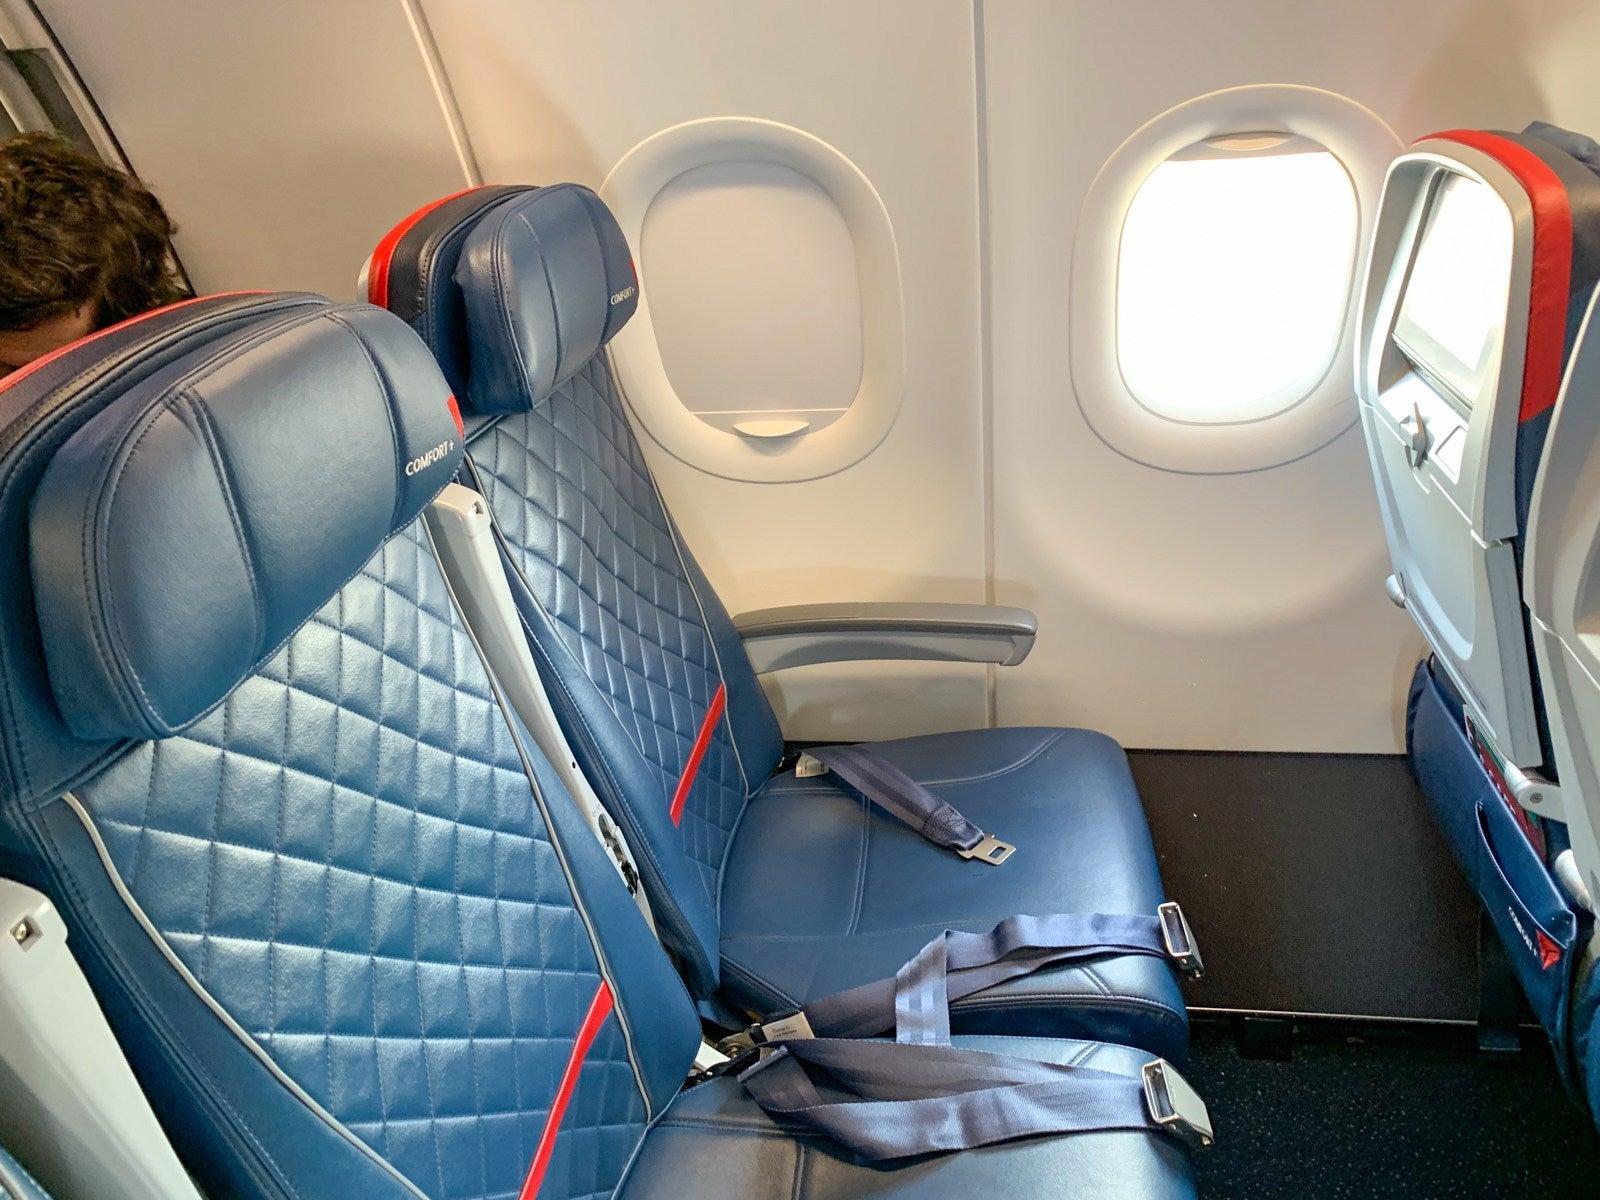 Review: Delta Comfort+ on the A321 from LGA to MCO - The Points Guy